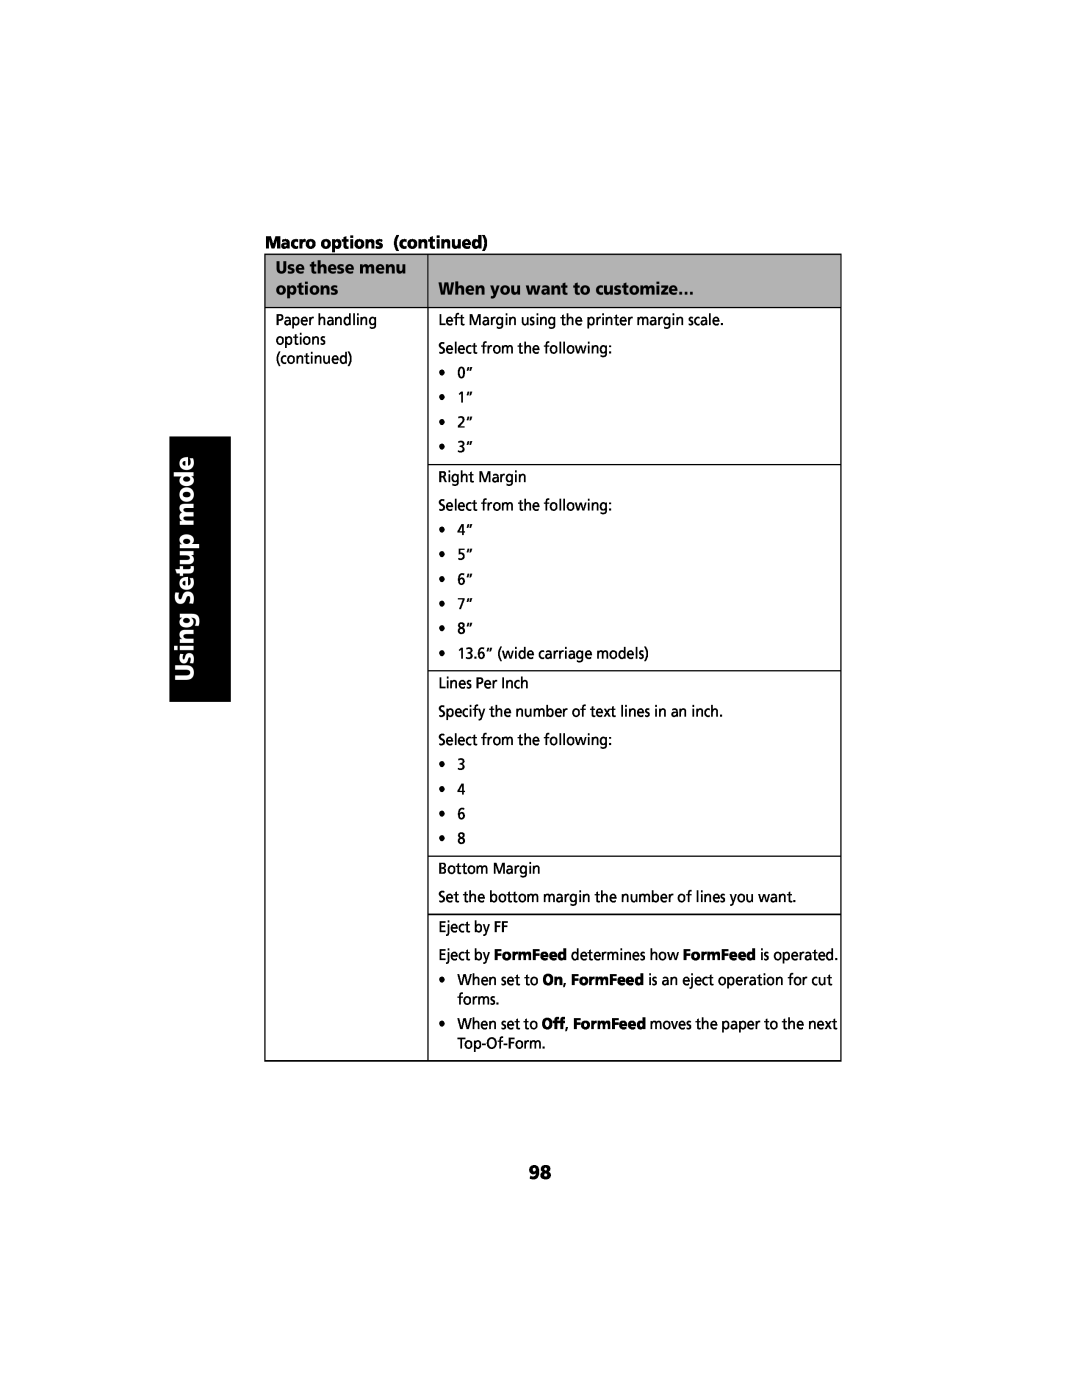 Lexmark 2480 manual Using Setup mode, Macro options continued, Use these menu, When you want to customize… 